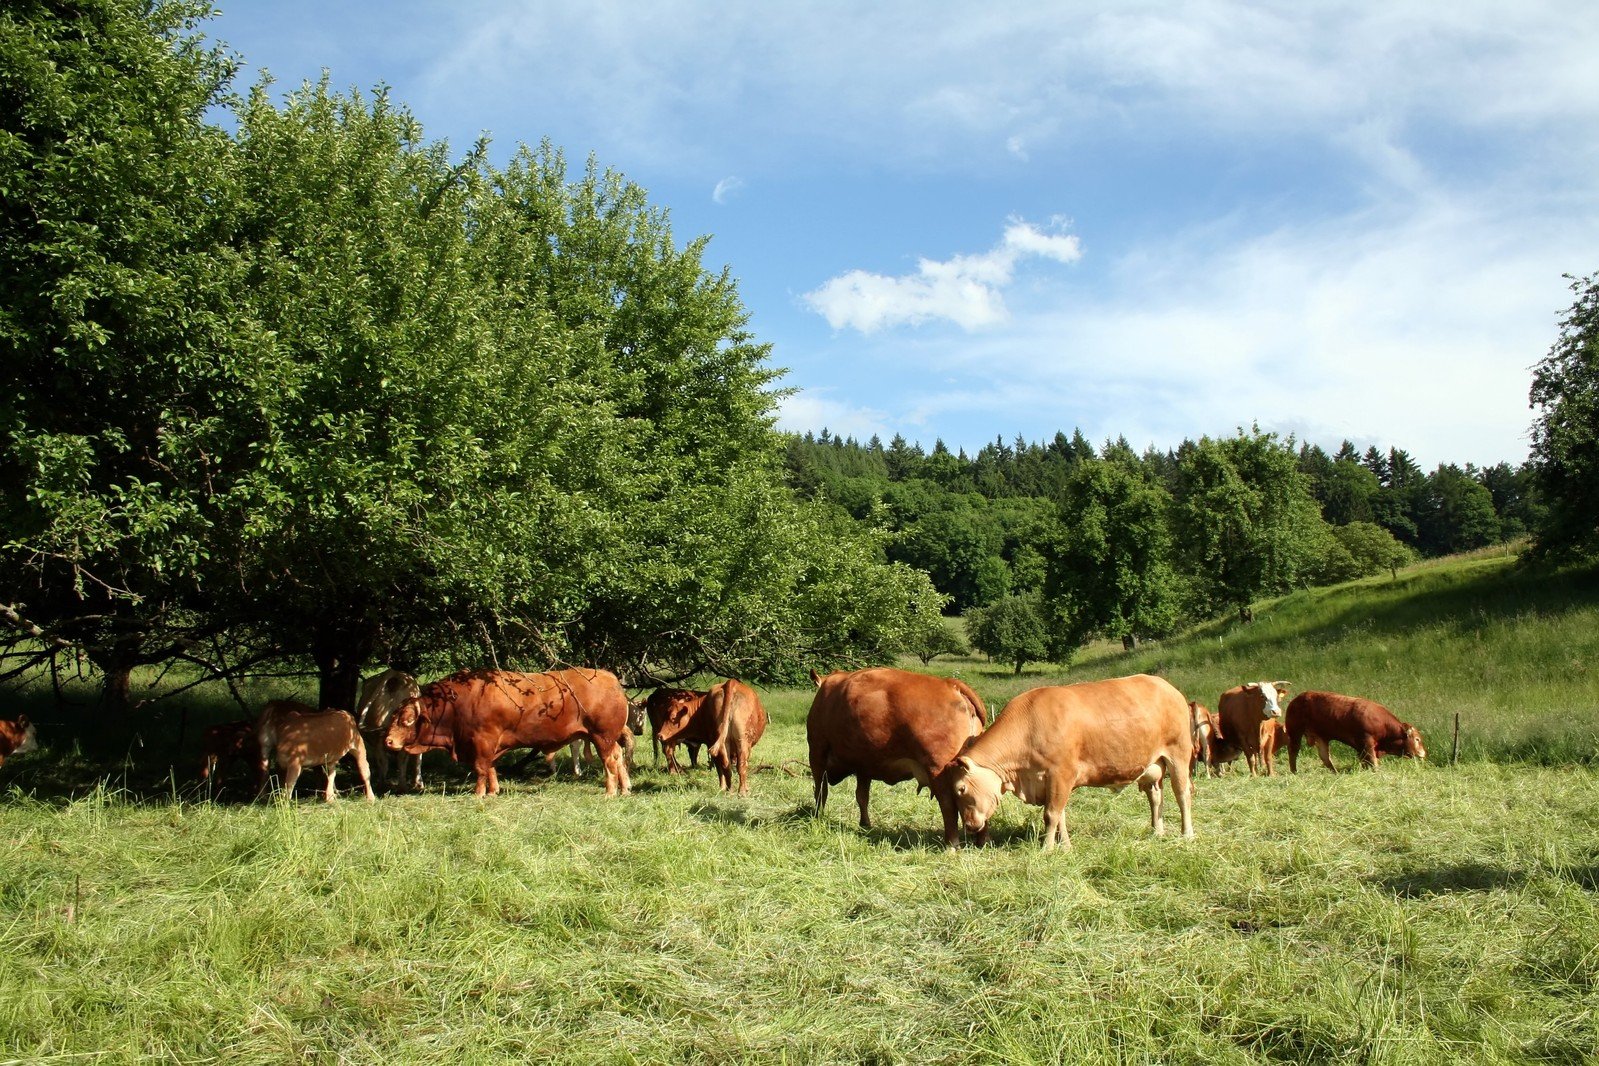 cows are grazing in the green grassy field